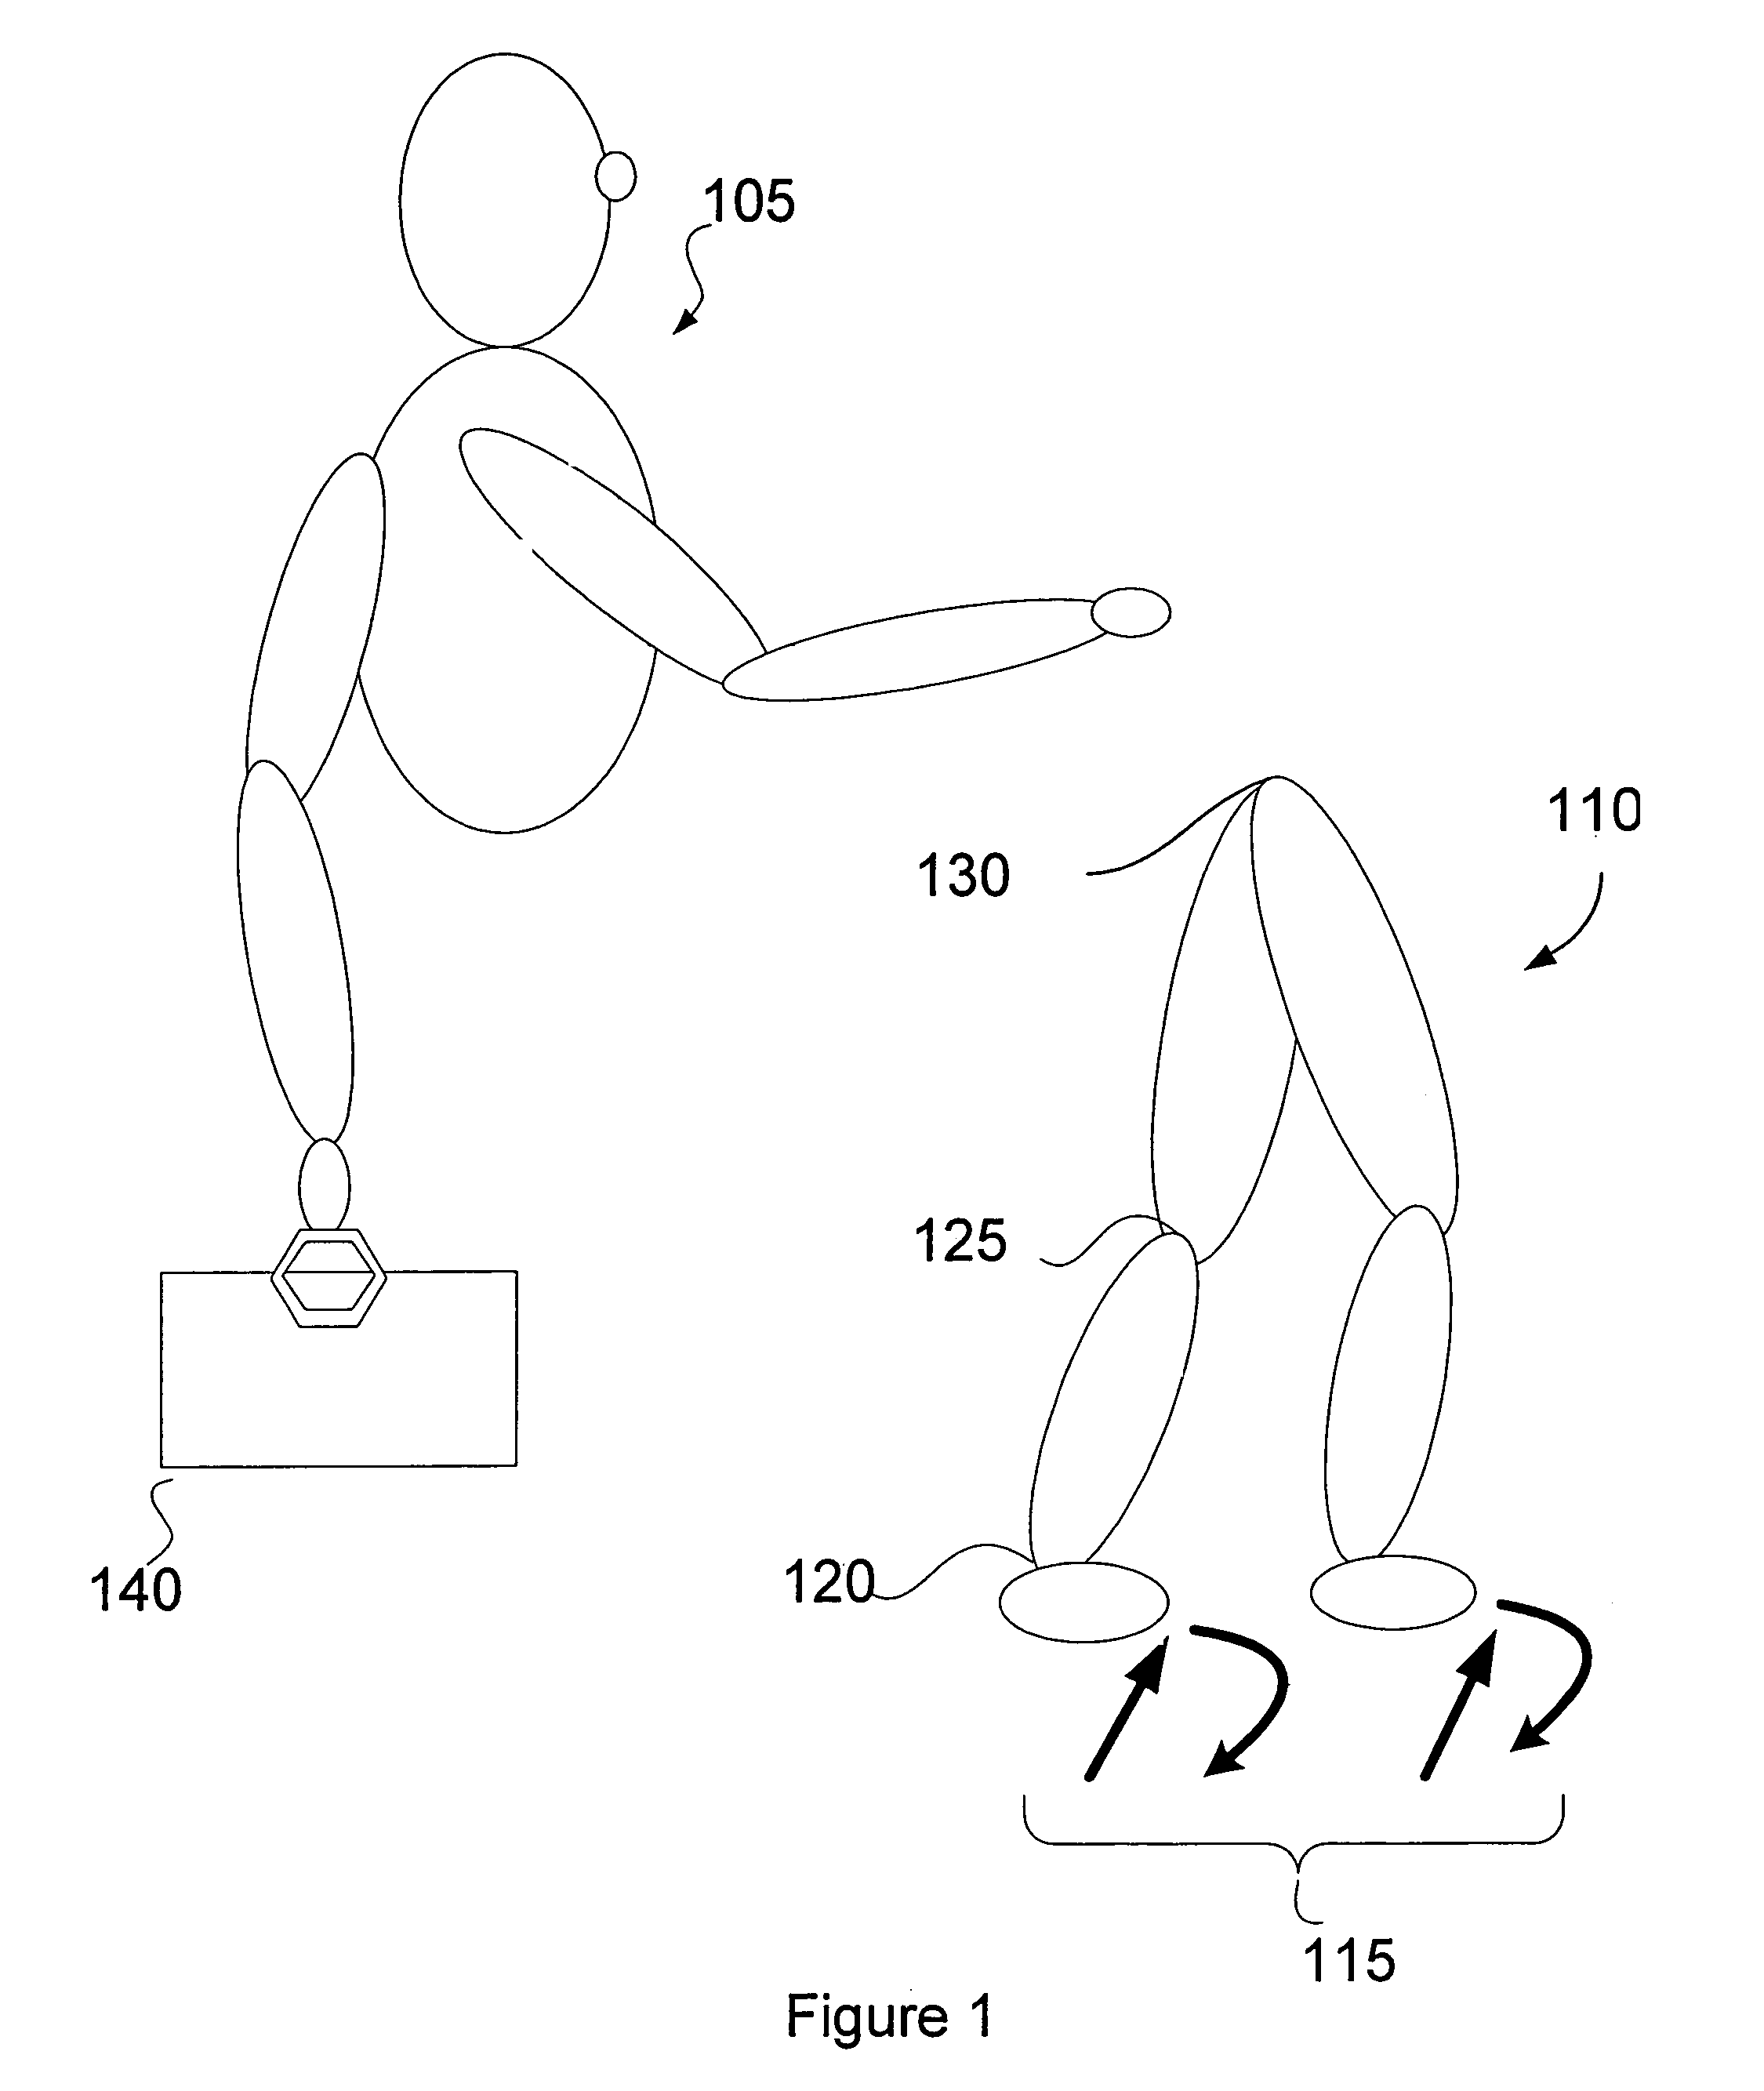 System and method of predicting novel motion in a serial chain system